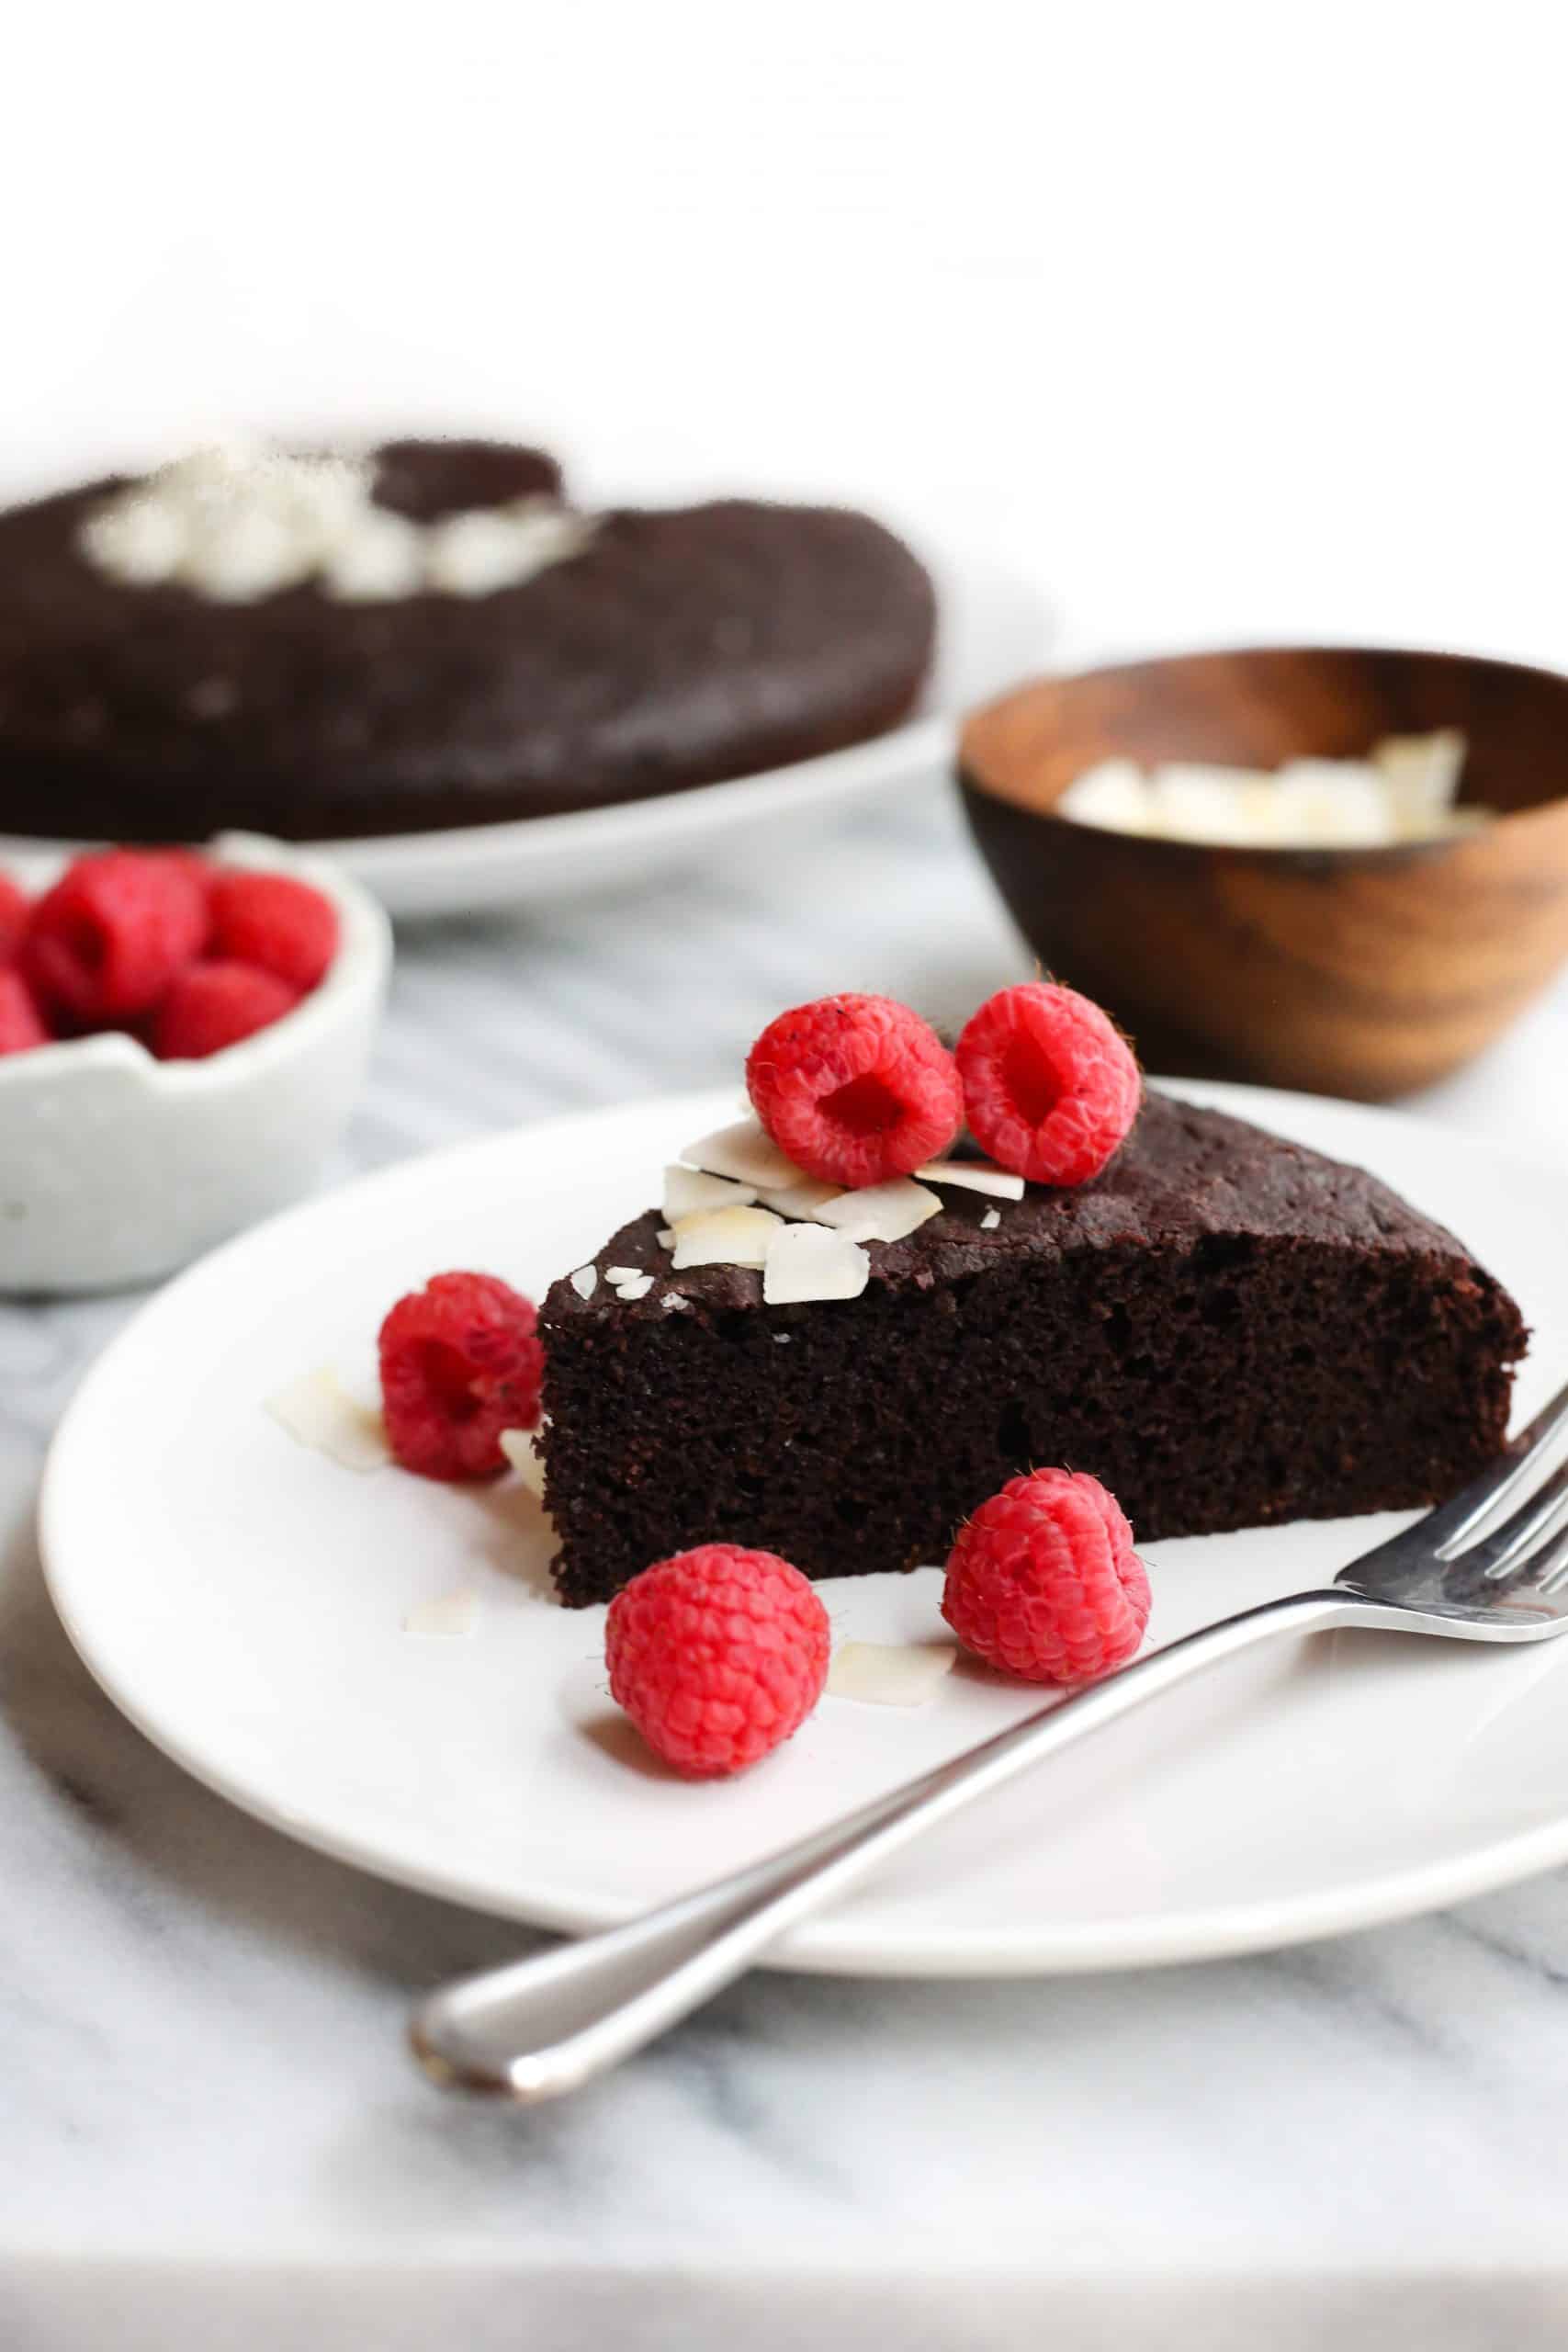 A slice of gluten-free chocolate cake on a small serving plate.